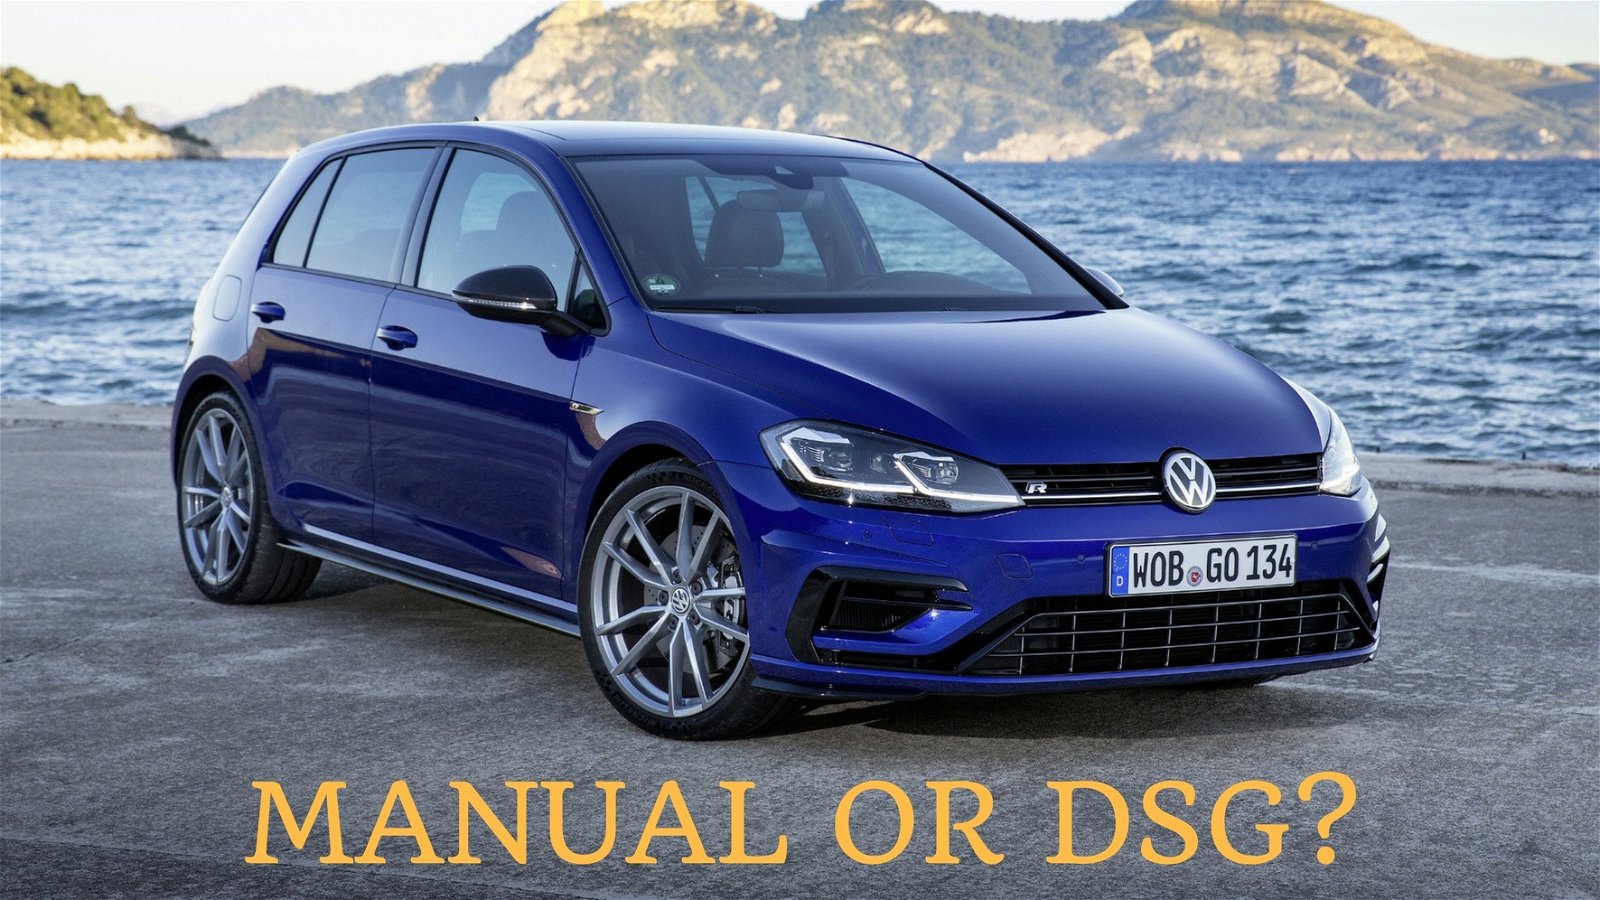 Vervolg Voorzichtig Verbazingwekkend Is the VW Golf R better with a manual or automatic gearbox? | DriveMag Cars